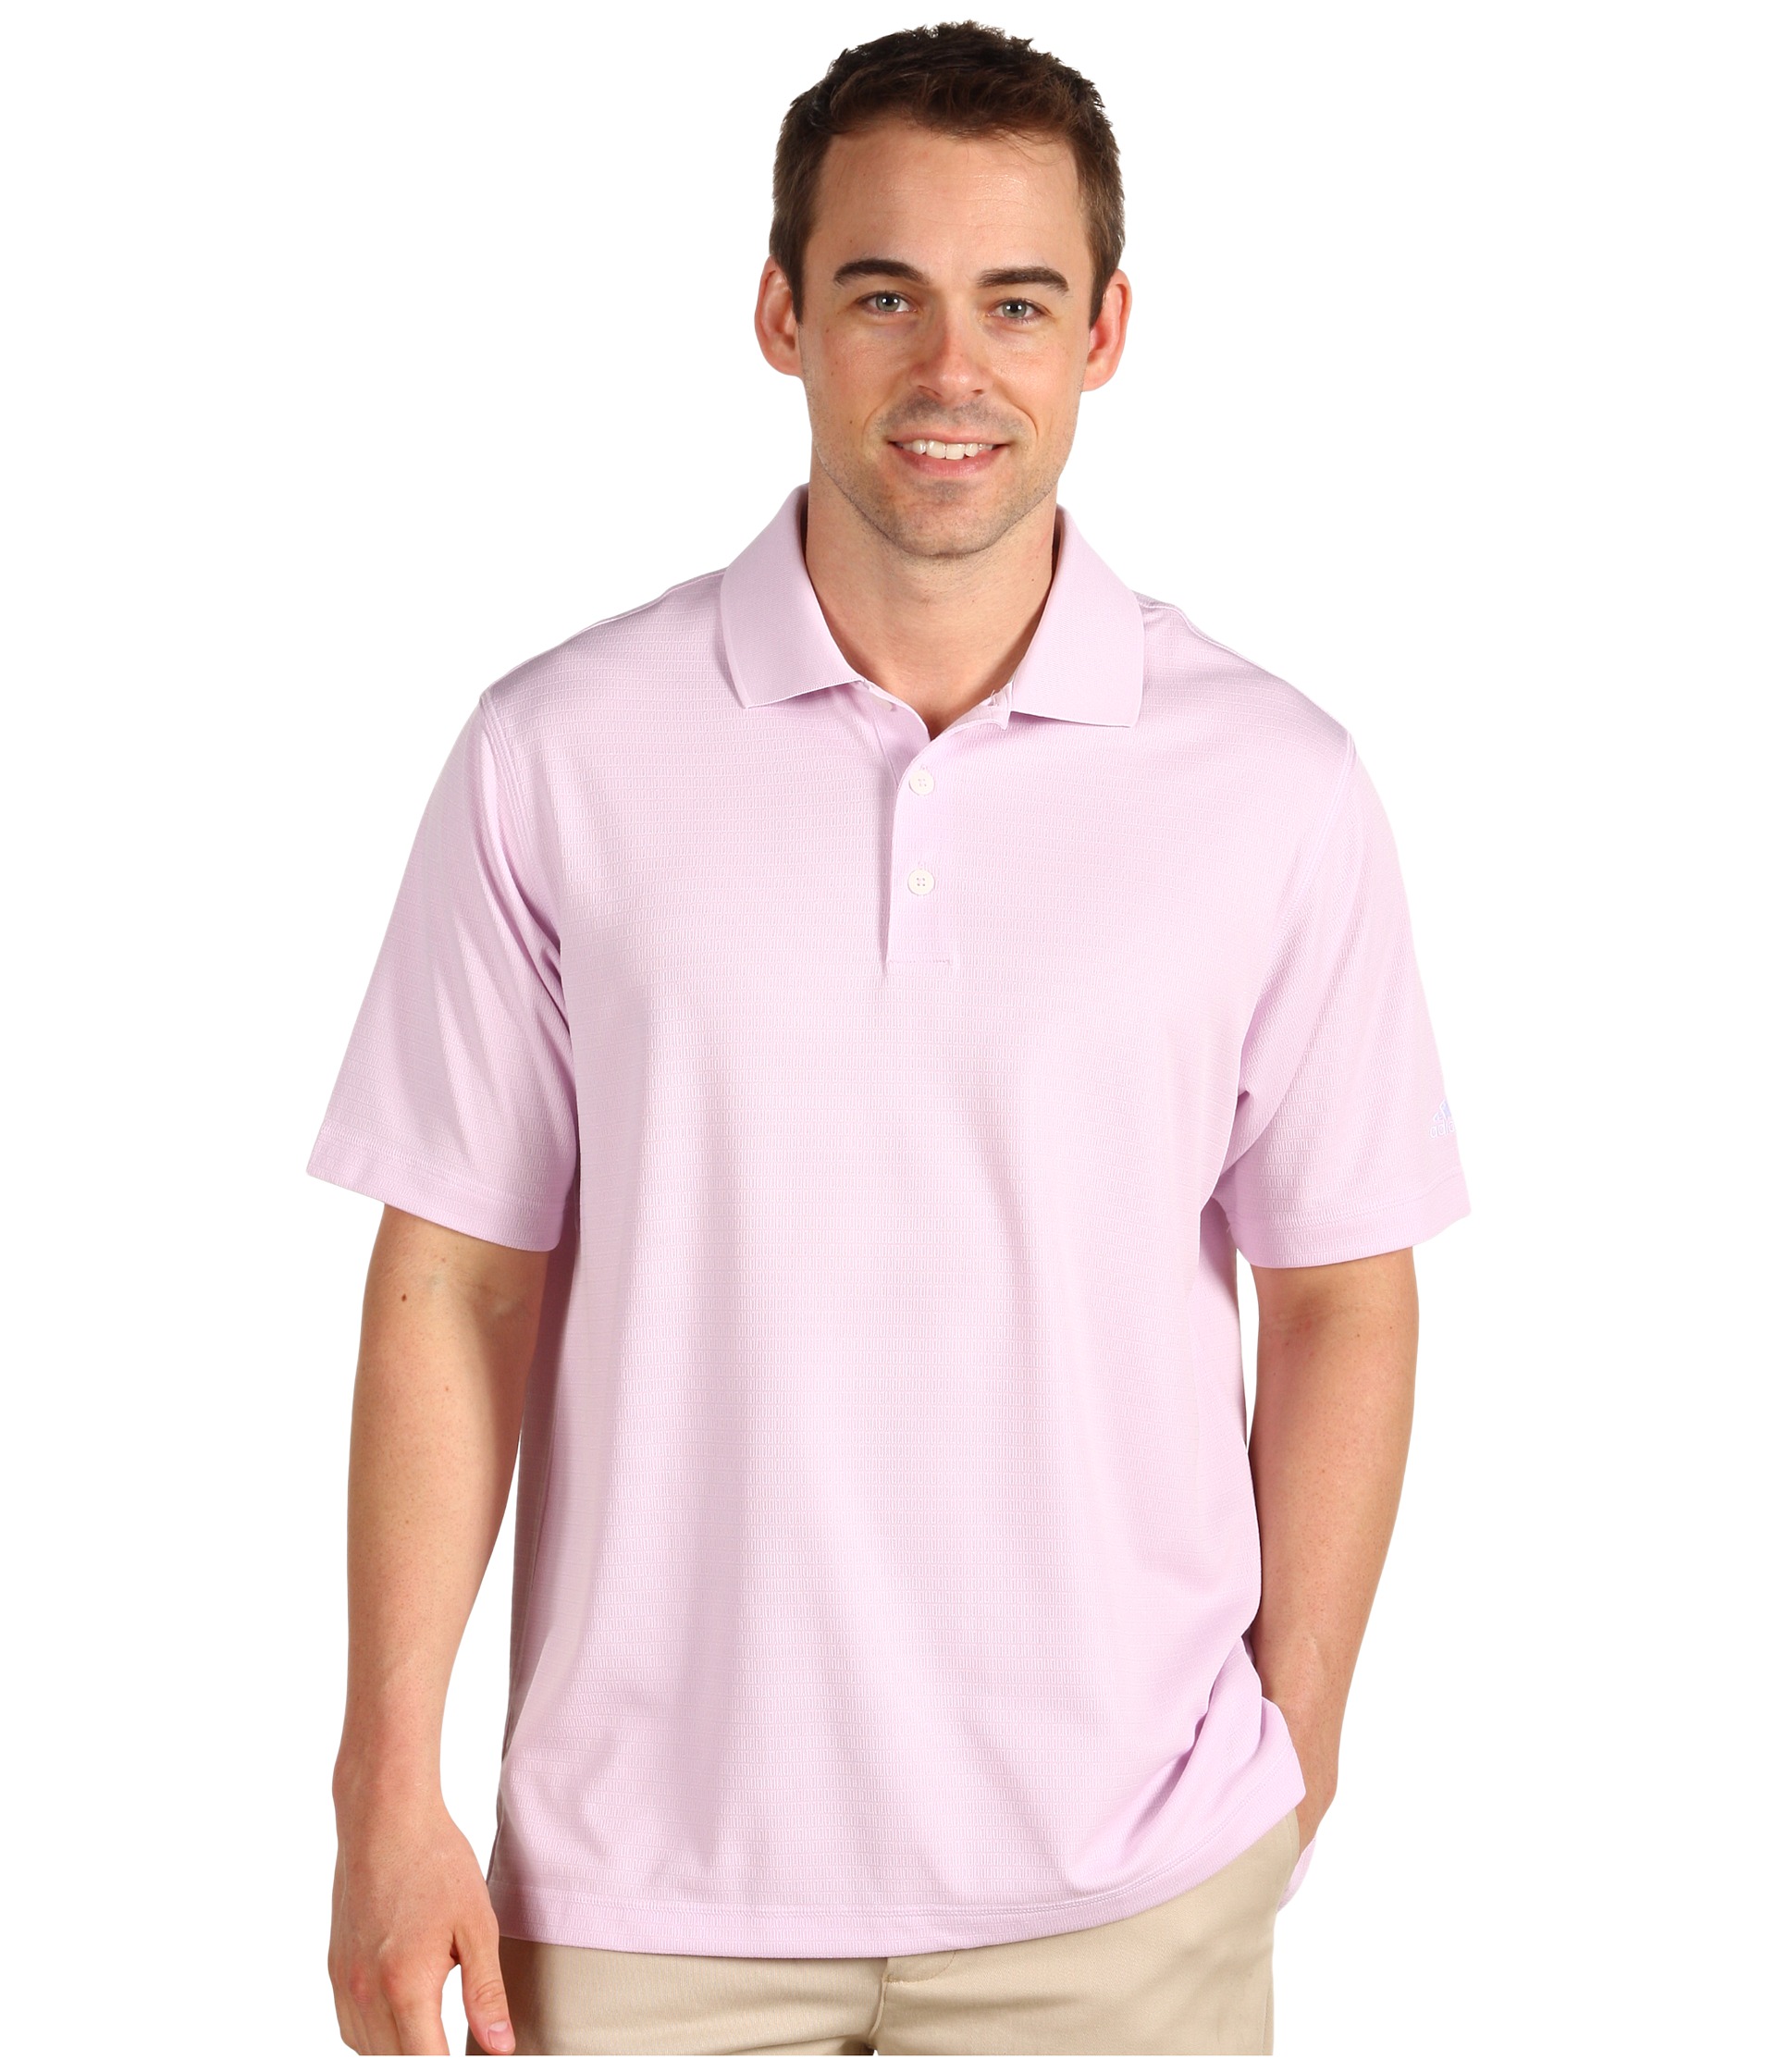 adidas Golf ClimaLite® Solid Polo 13 $21.99 (  MSRP $45.00)